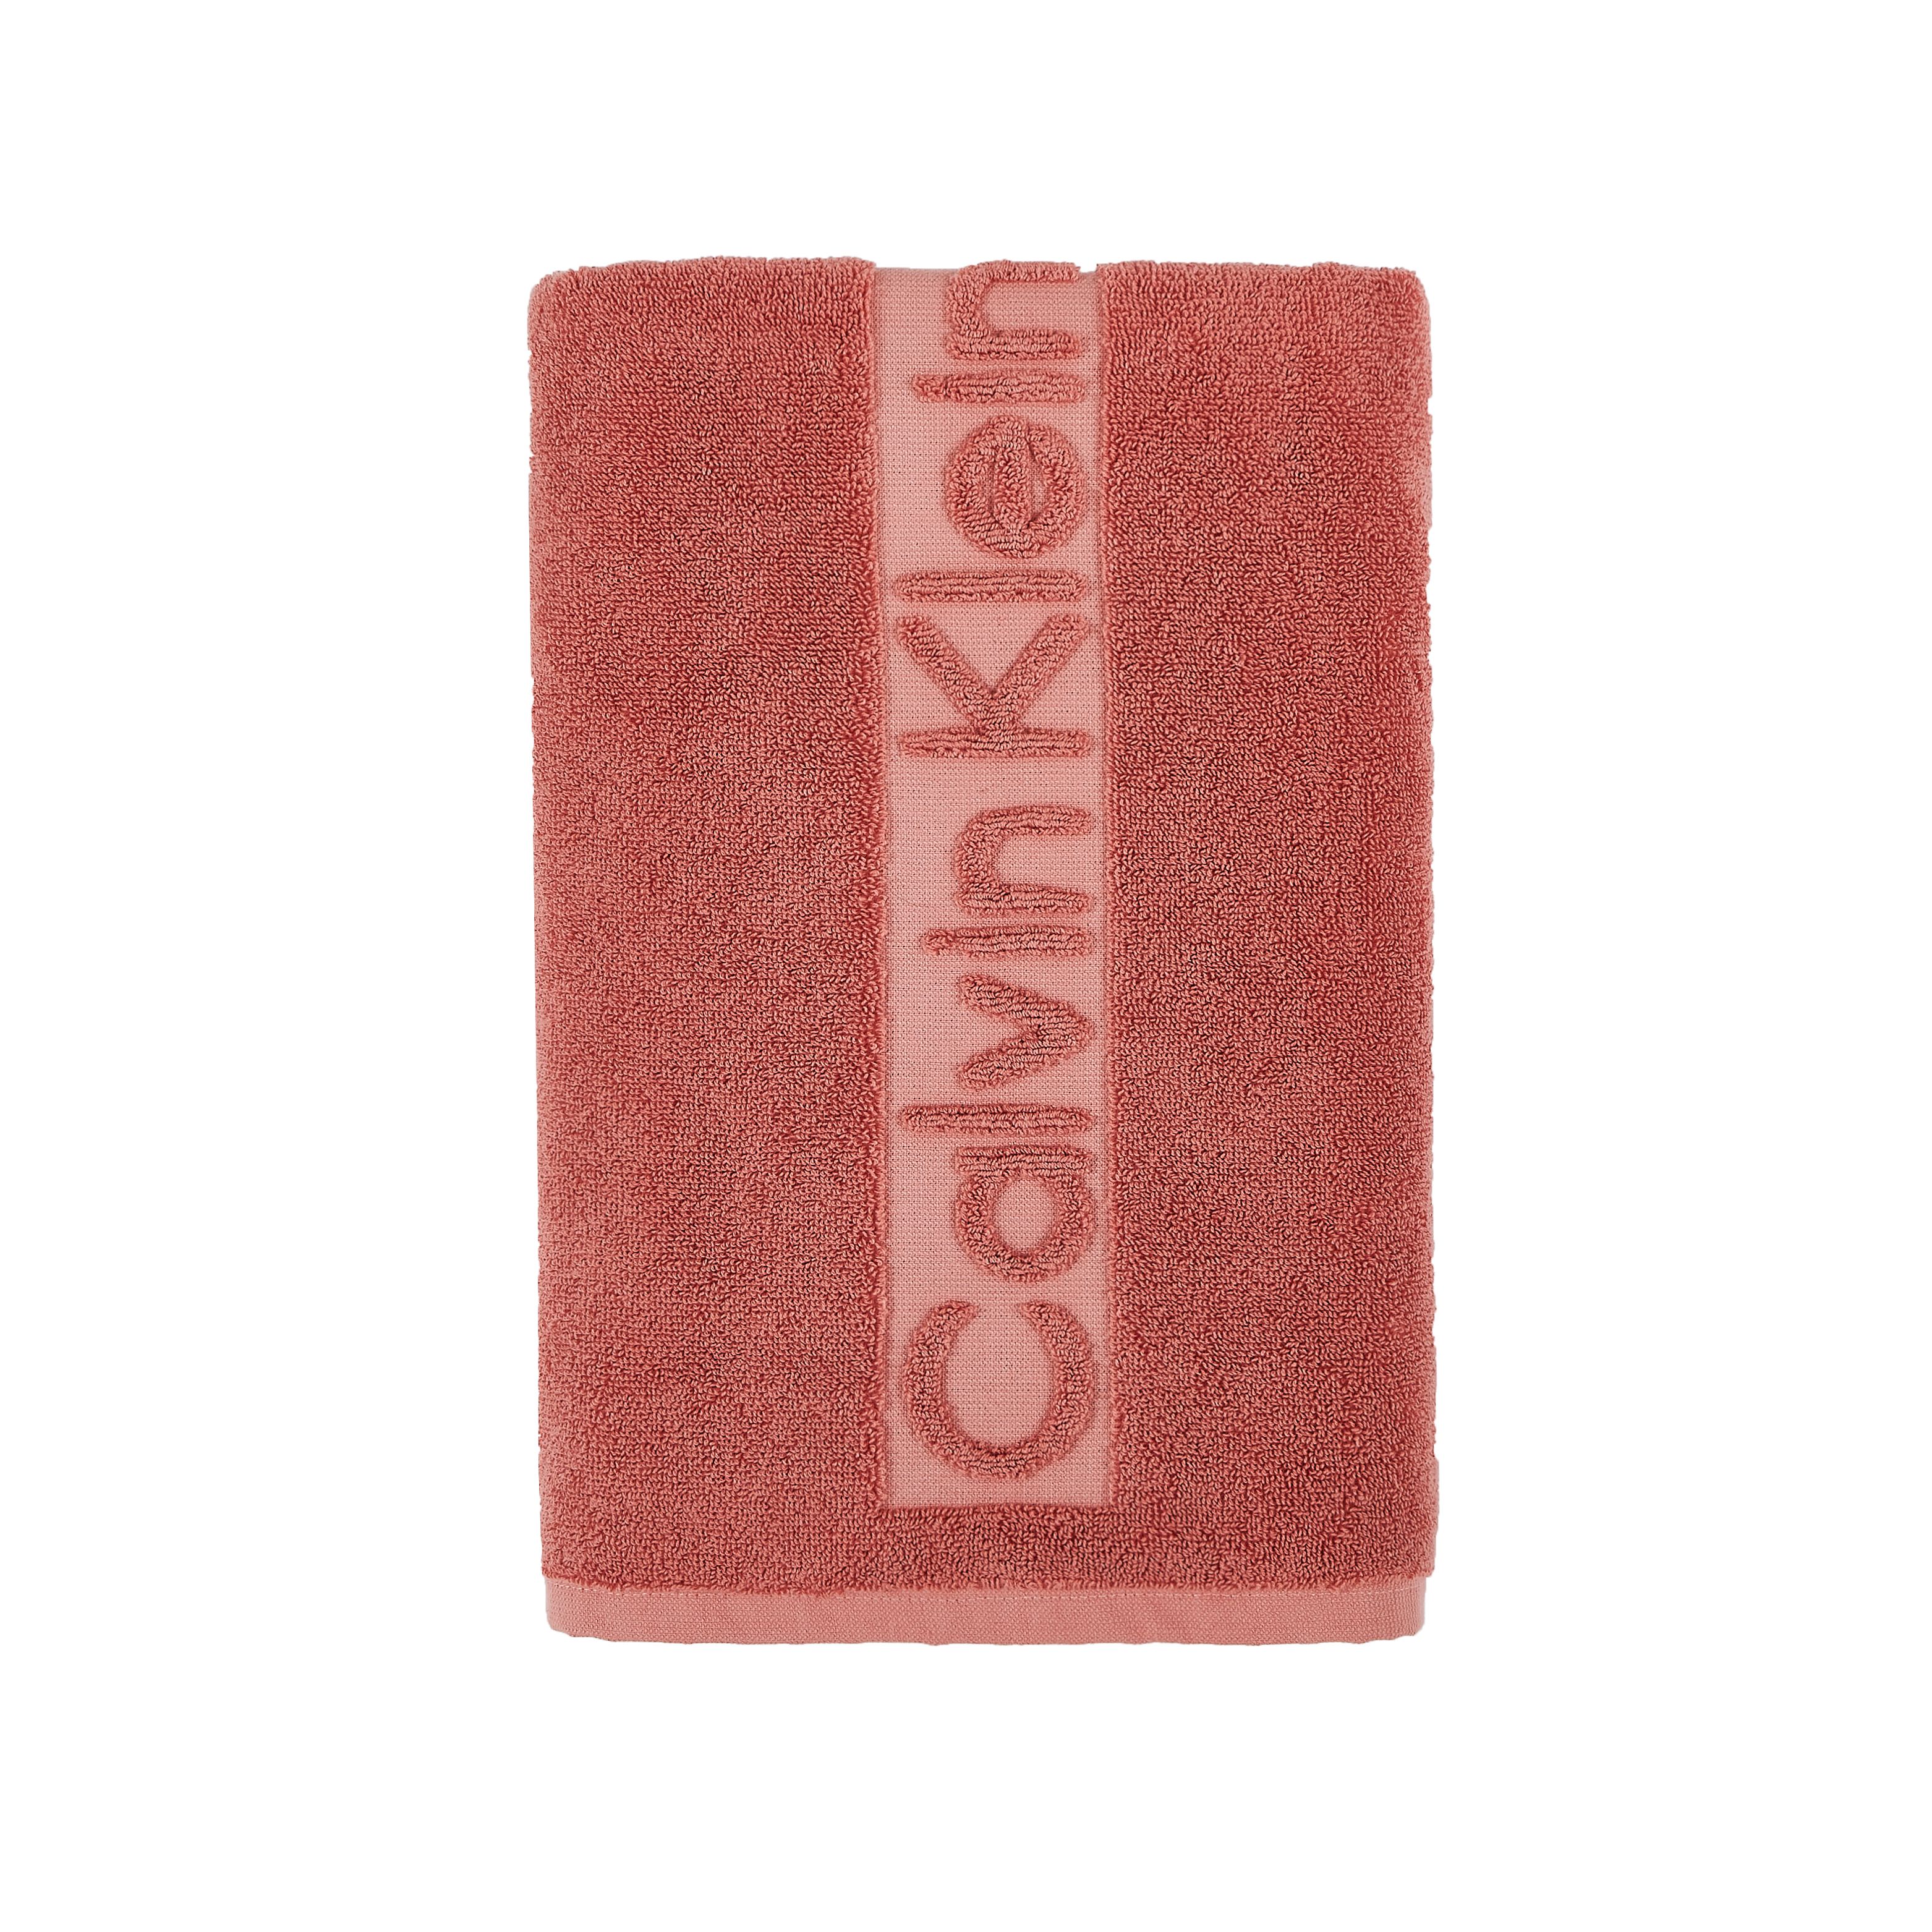 The Calvin klein Sculpted CK Logo Towel Collection is made of fine 629 GSM, and these 100% cotton Sculpted piece dyed jacquard towels feature a bold signature Calvin Klein logo on the smaller edge. Available in a range of colours - White, Nimbus Cloud, Sky, Dark Denim, Reef, Rose, Hyacinth, Sage, Fawn, Pink Terra Cotta